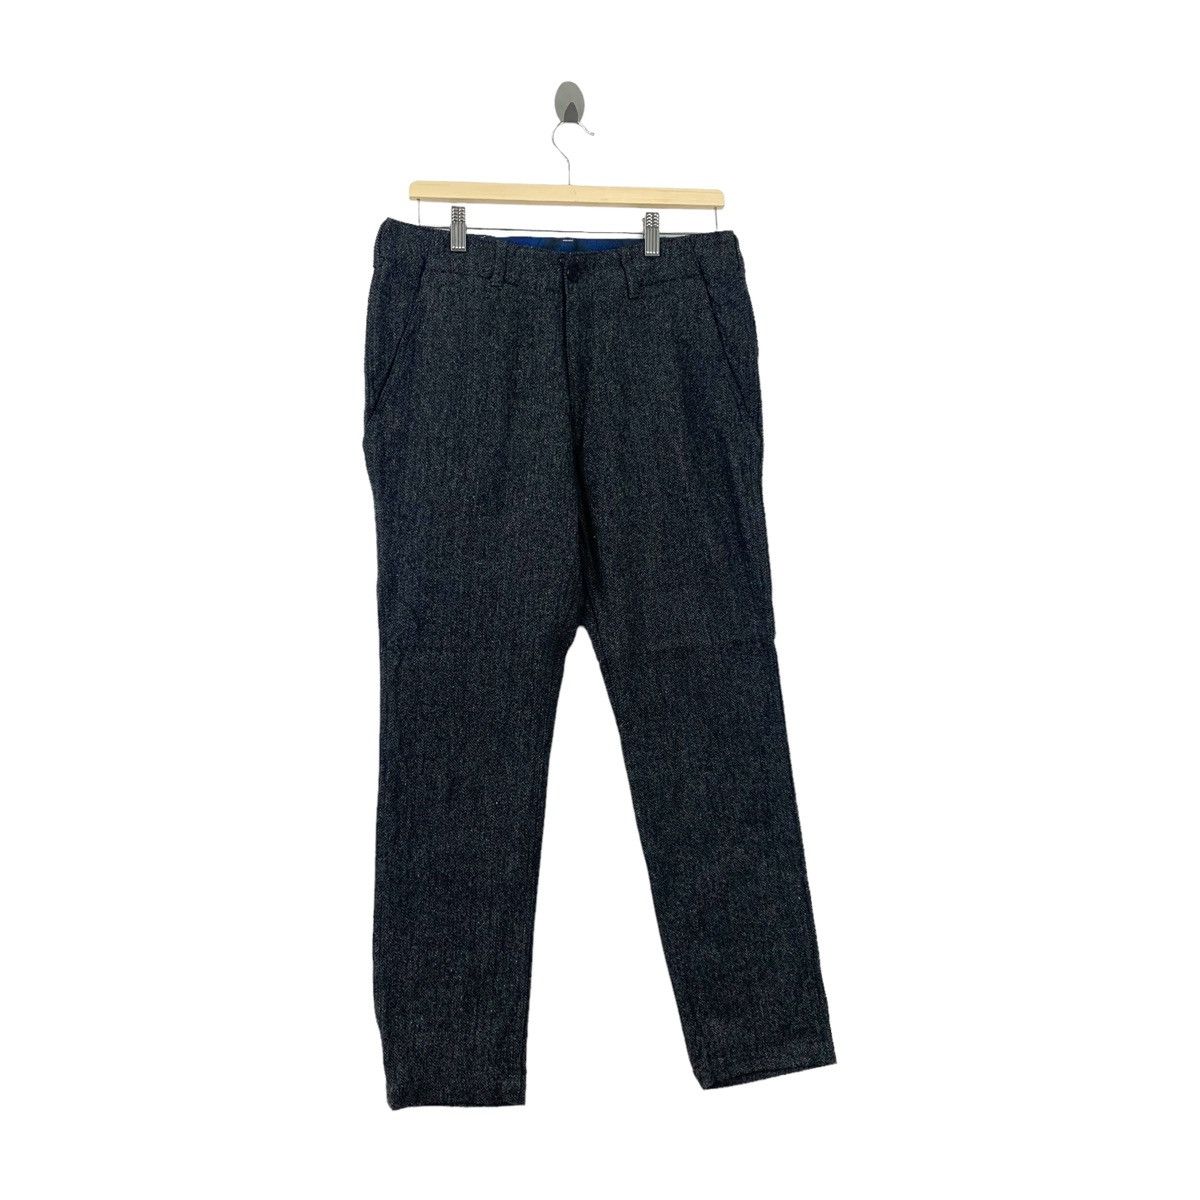 Beauty & Youth BEAUTY & YOUTH United Arrows Japanese Brand Wool Trouser Size US 32 / EU 48 - 2 Preview